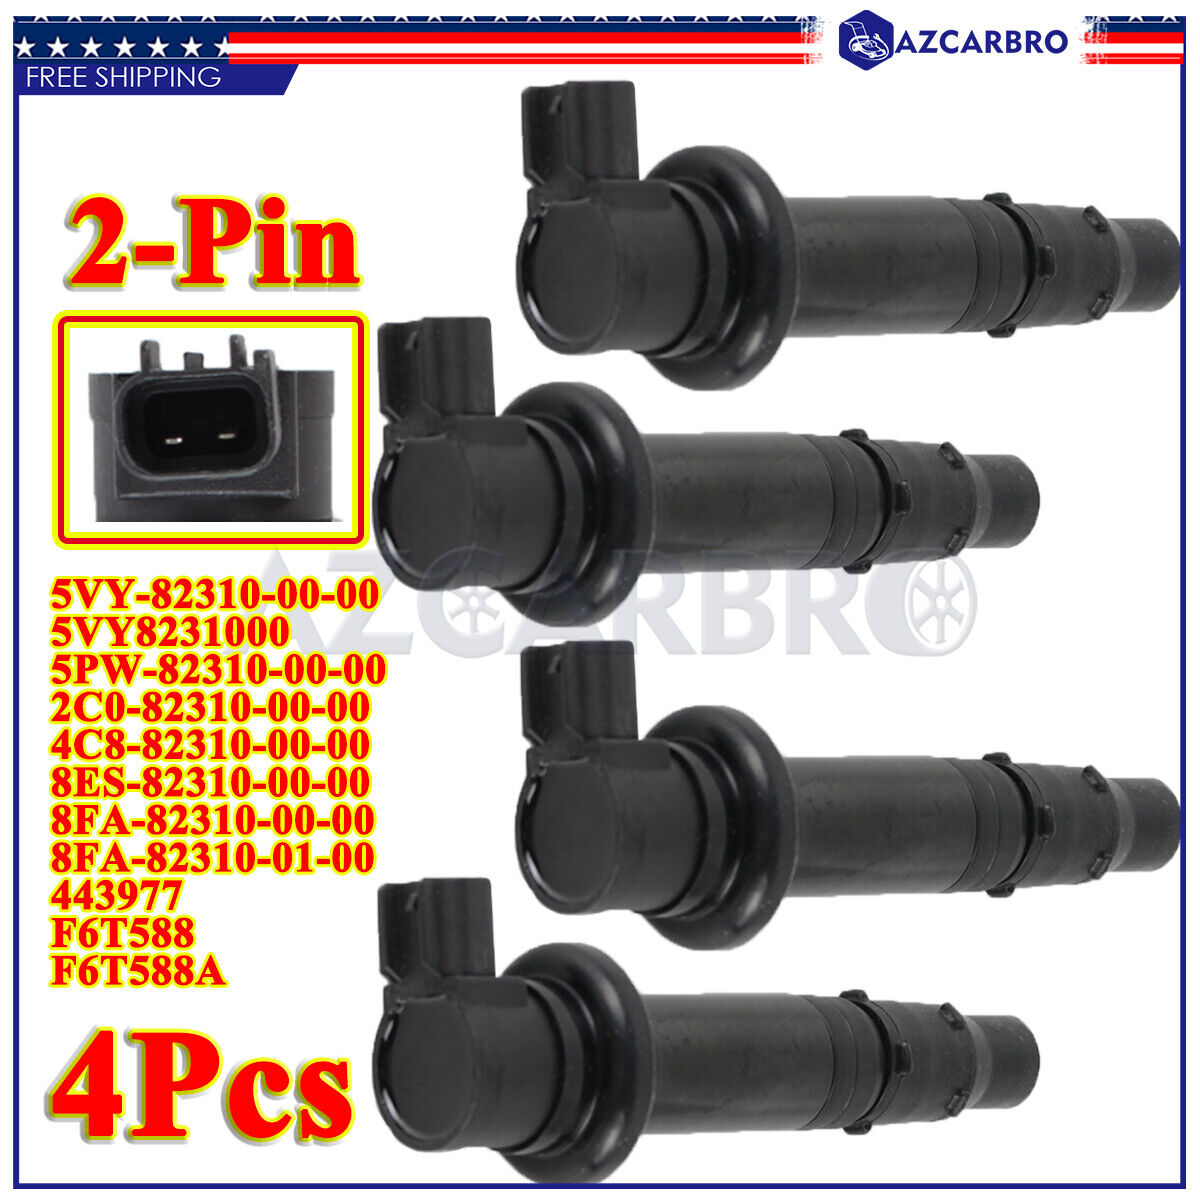  4pcs 5VY-82310-00-00 Ignition Coil For Yamaha FZ1 FZS1 YZF R1 R6 R6S Vmax 1700